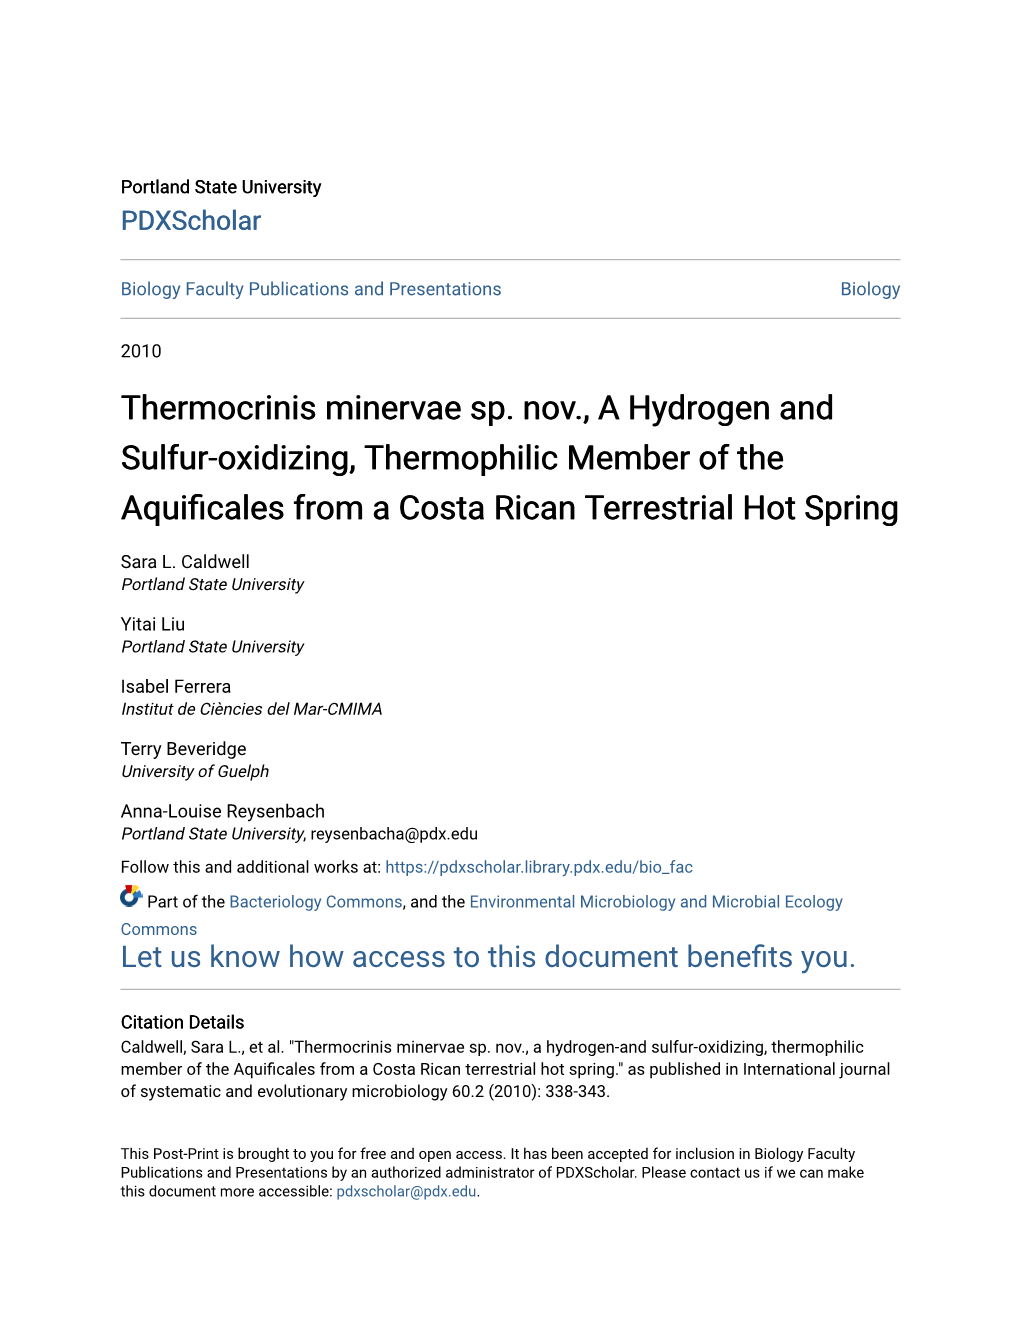 Thermocrinis Minervae Sp. Nov., a Hydrogen and Sulfur-Oxidizing, Thermophilic Member of the Aquificales from a Costa Rican Terrestrial Hot Spring